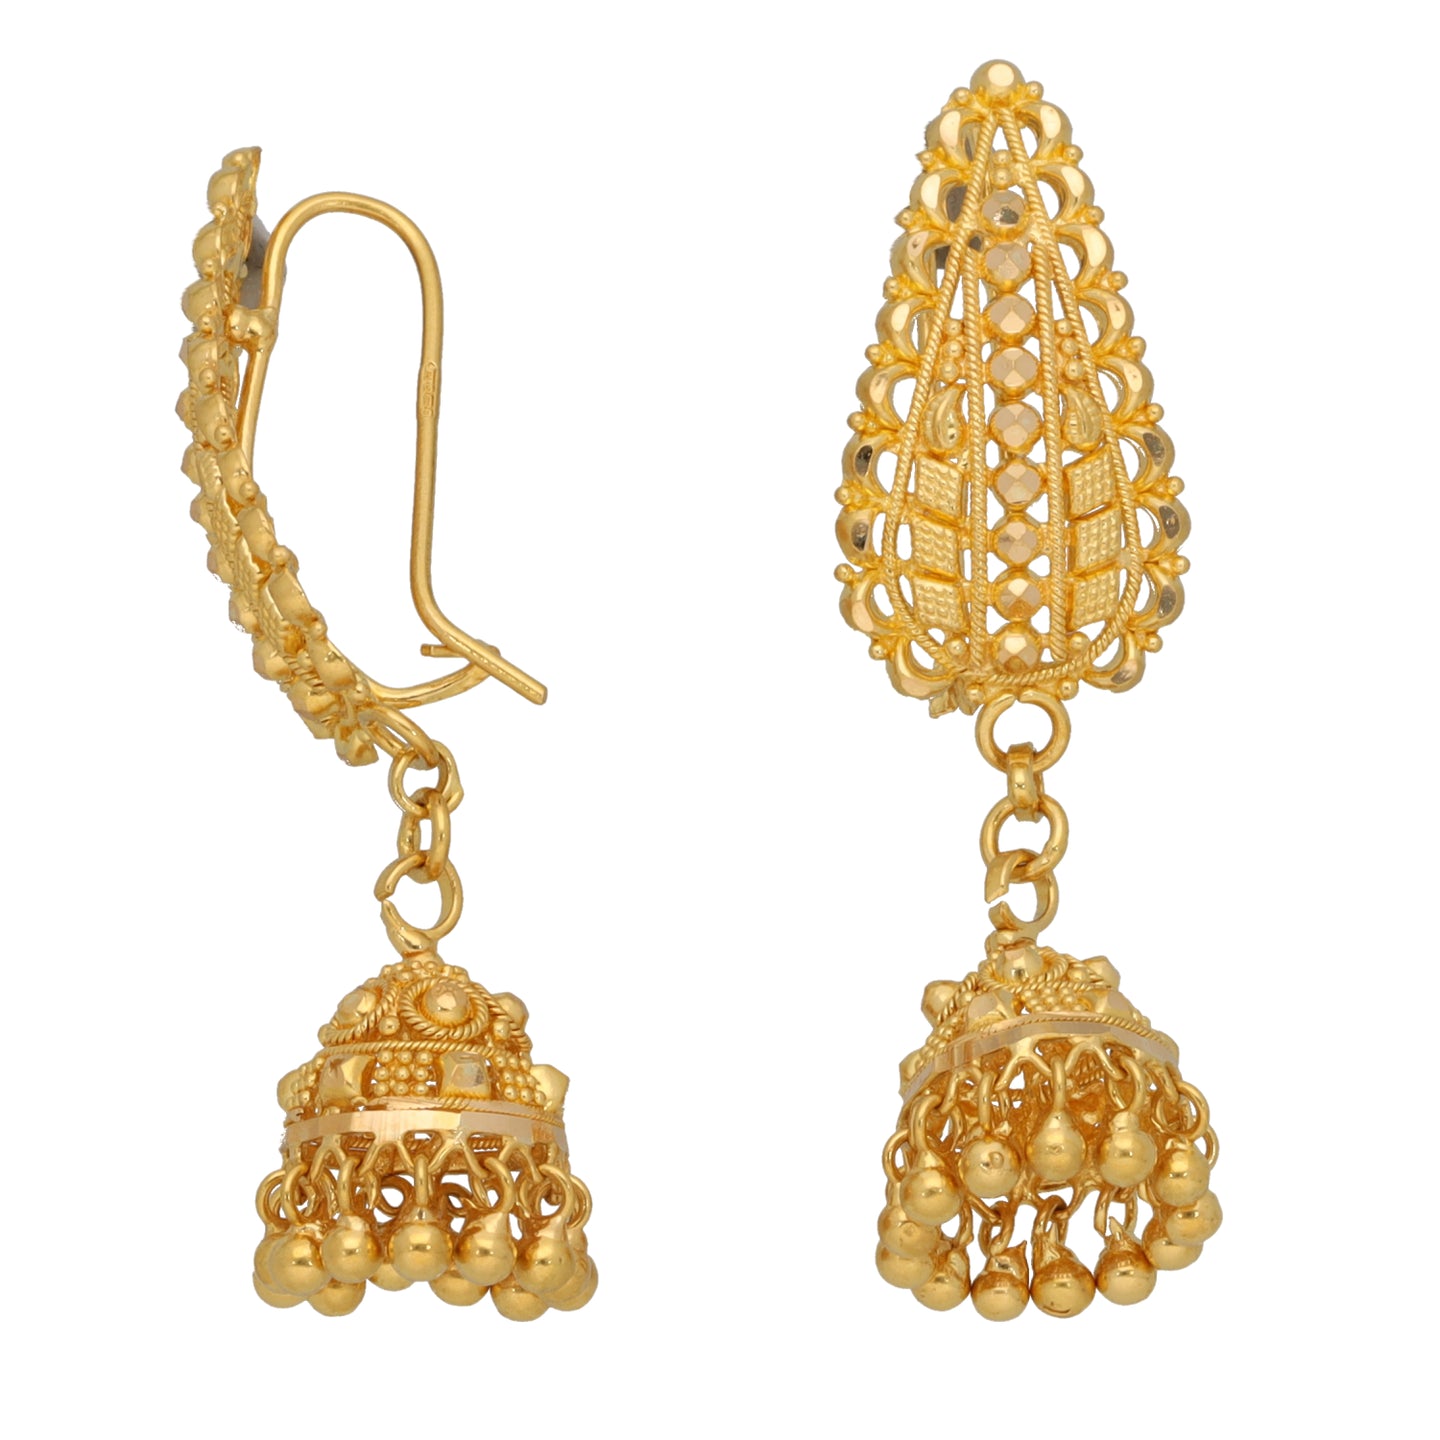 22ct Gold Dress/Cocktail Earrings